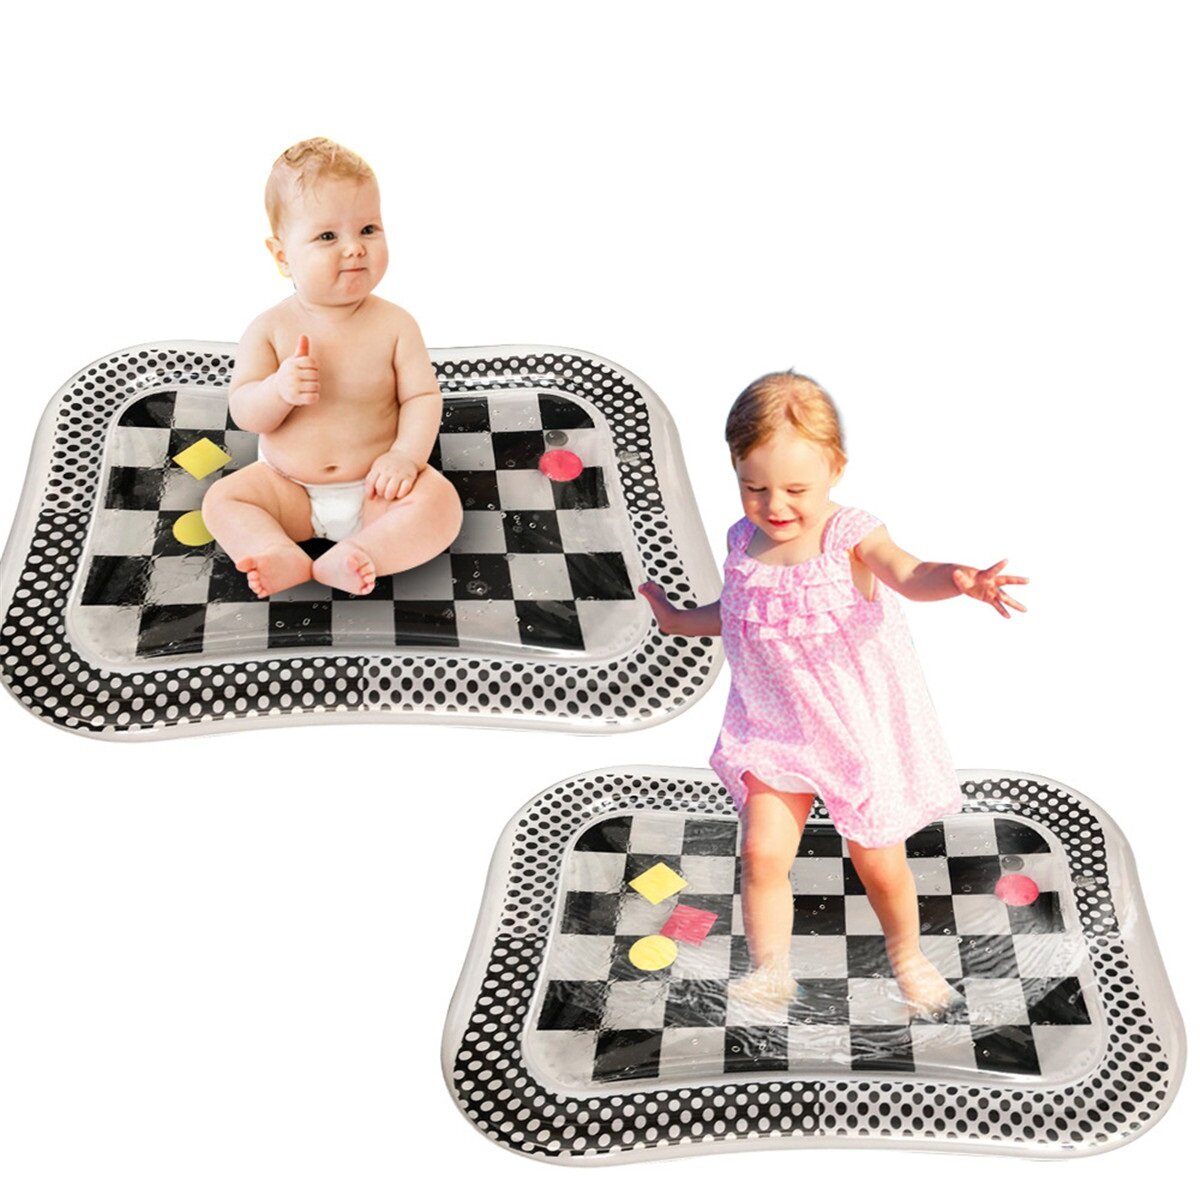 Infant Toy Gift Baby Activity Play Mat Inflatable Sensory Playmat Indoor Small Pad for Toddler Fun G